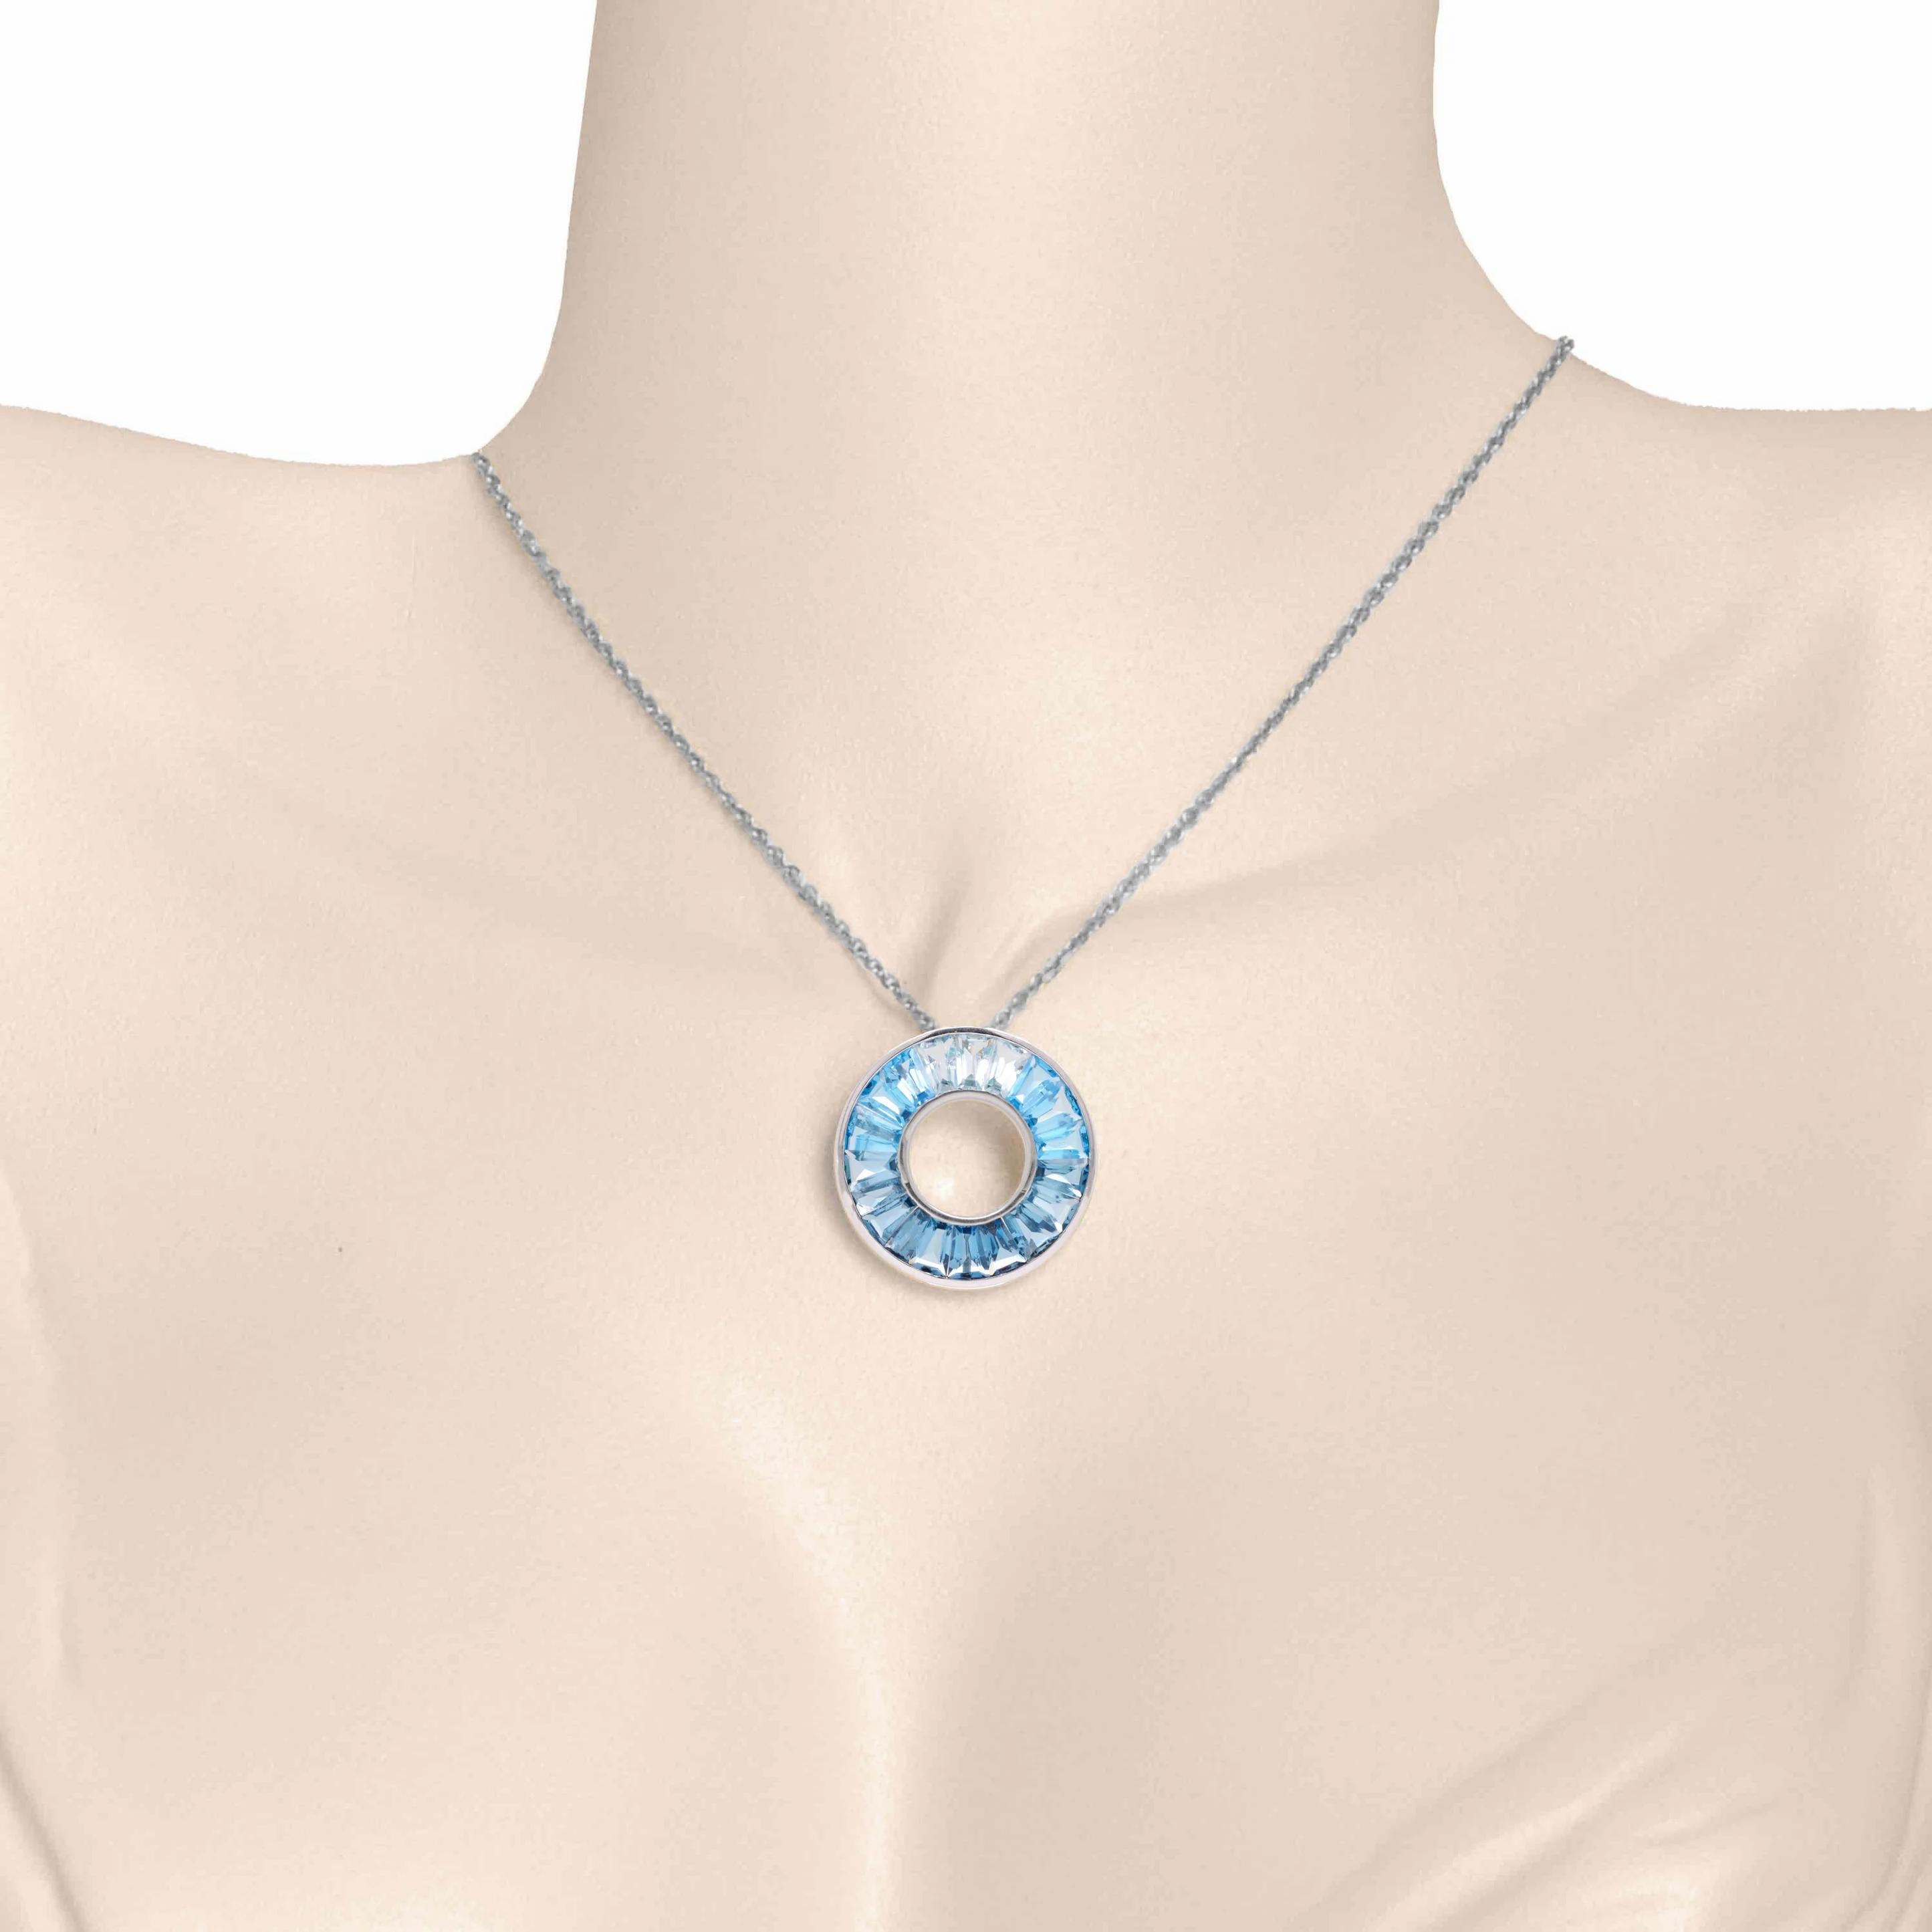 This exquisite 18K Gold Blue Topaz Circle Pendant Necklace, a true masterpiece that exudes elegance and sophistication. This necklace features a mesmerizing blue topaz gemstone in a circular setting, creating a perfect blend of timeless beauty and